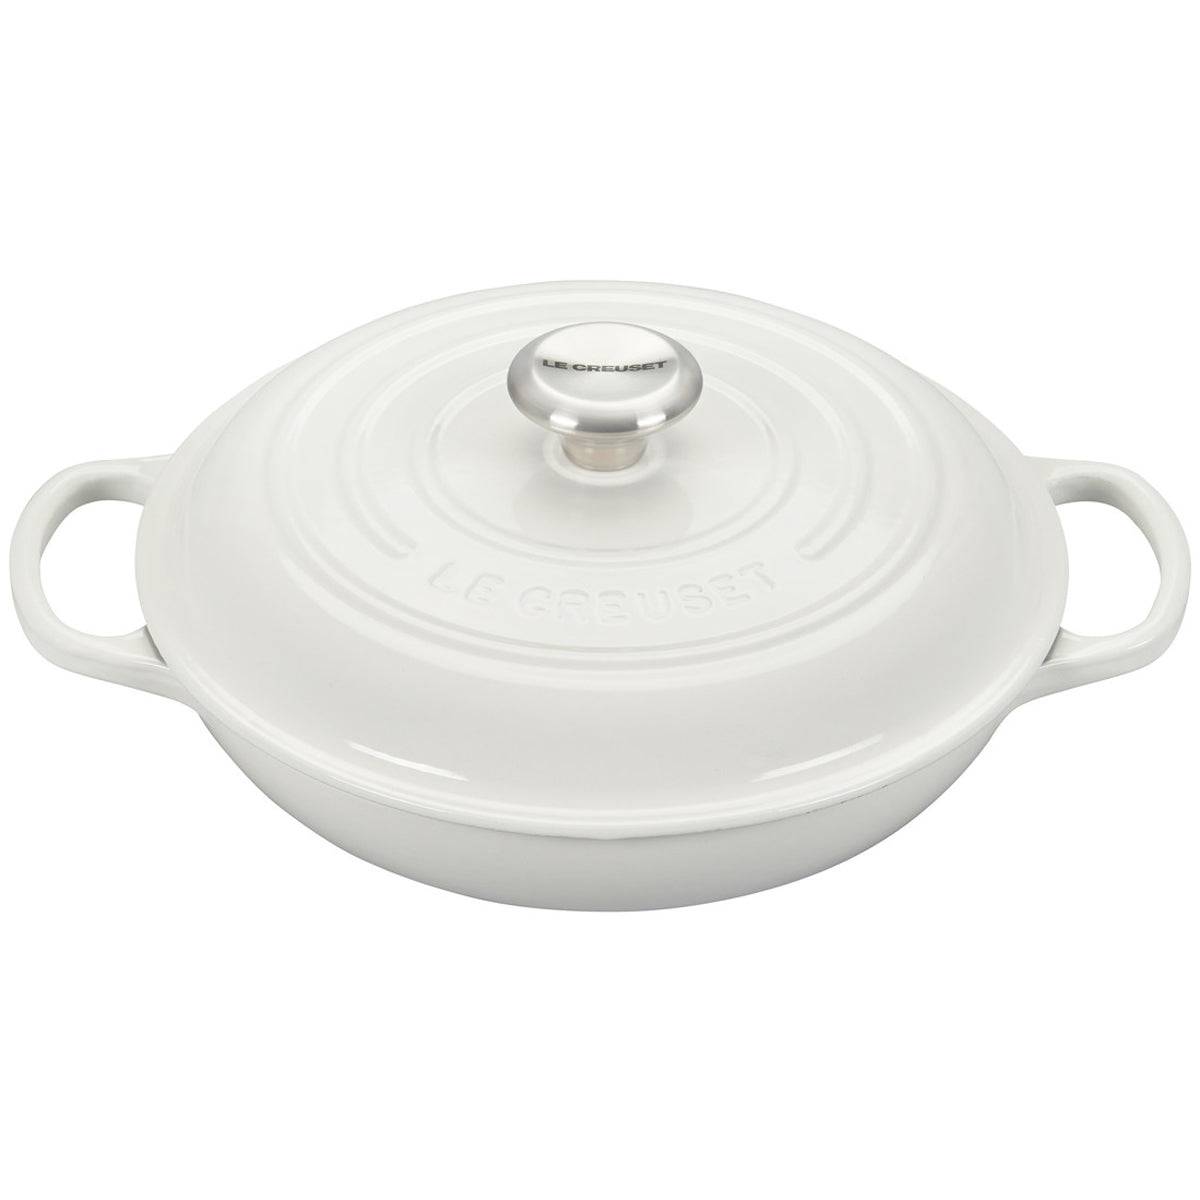 https://www.kitchen-universe.com/cdn/shop/products/Le-Creuset-Signature-Enameled-Cast-Iron-Braiser-with-Stainless-Steel-Knob_-White_011d66ee-3e7c-442b-95cd-a863d2a78ae4_1200x.jpg?v=1665632549